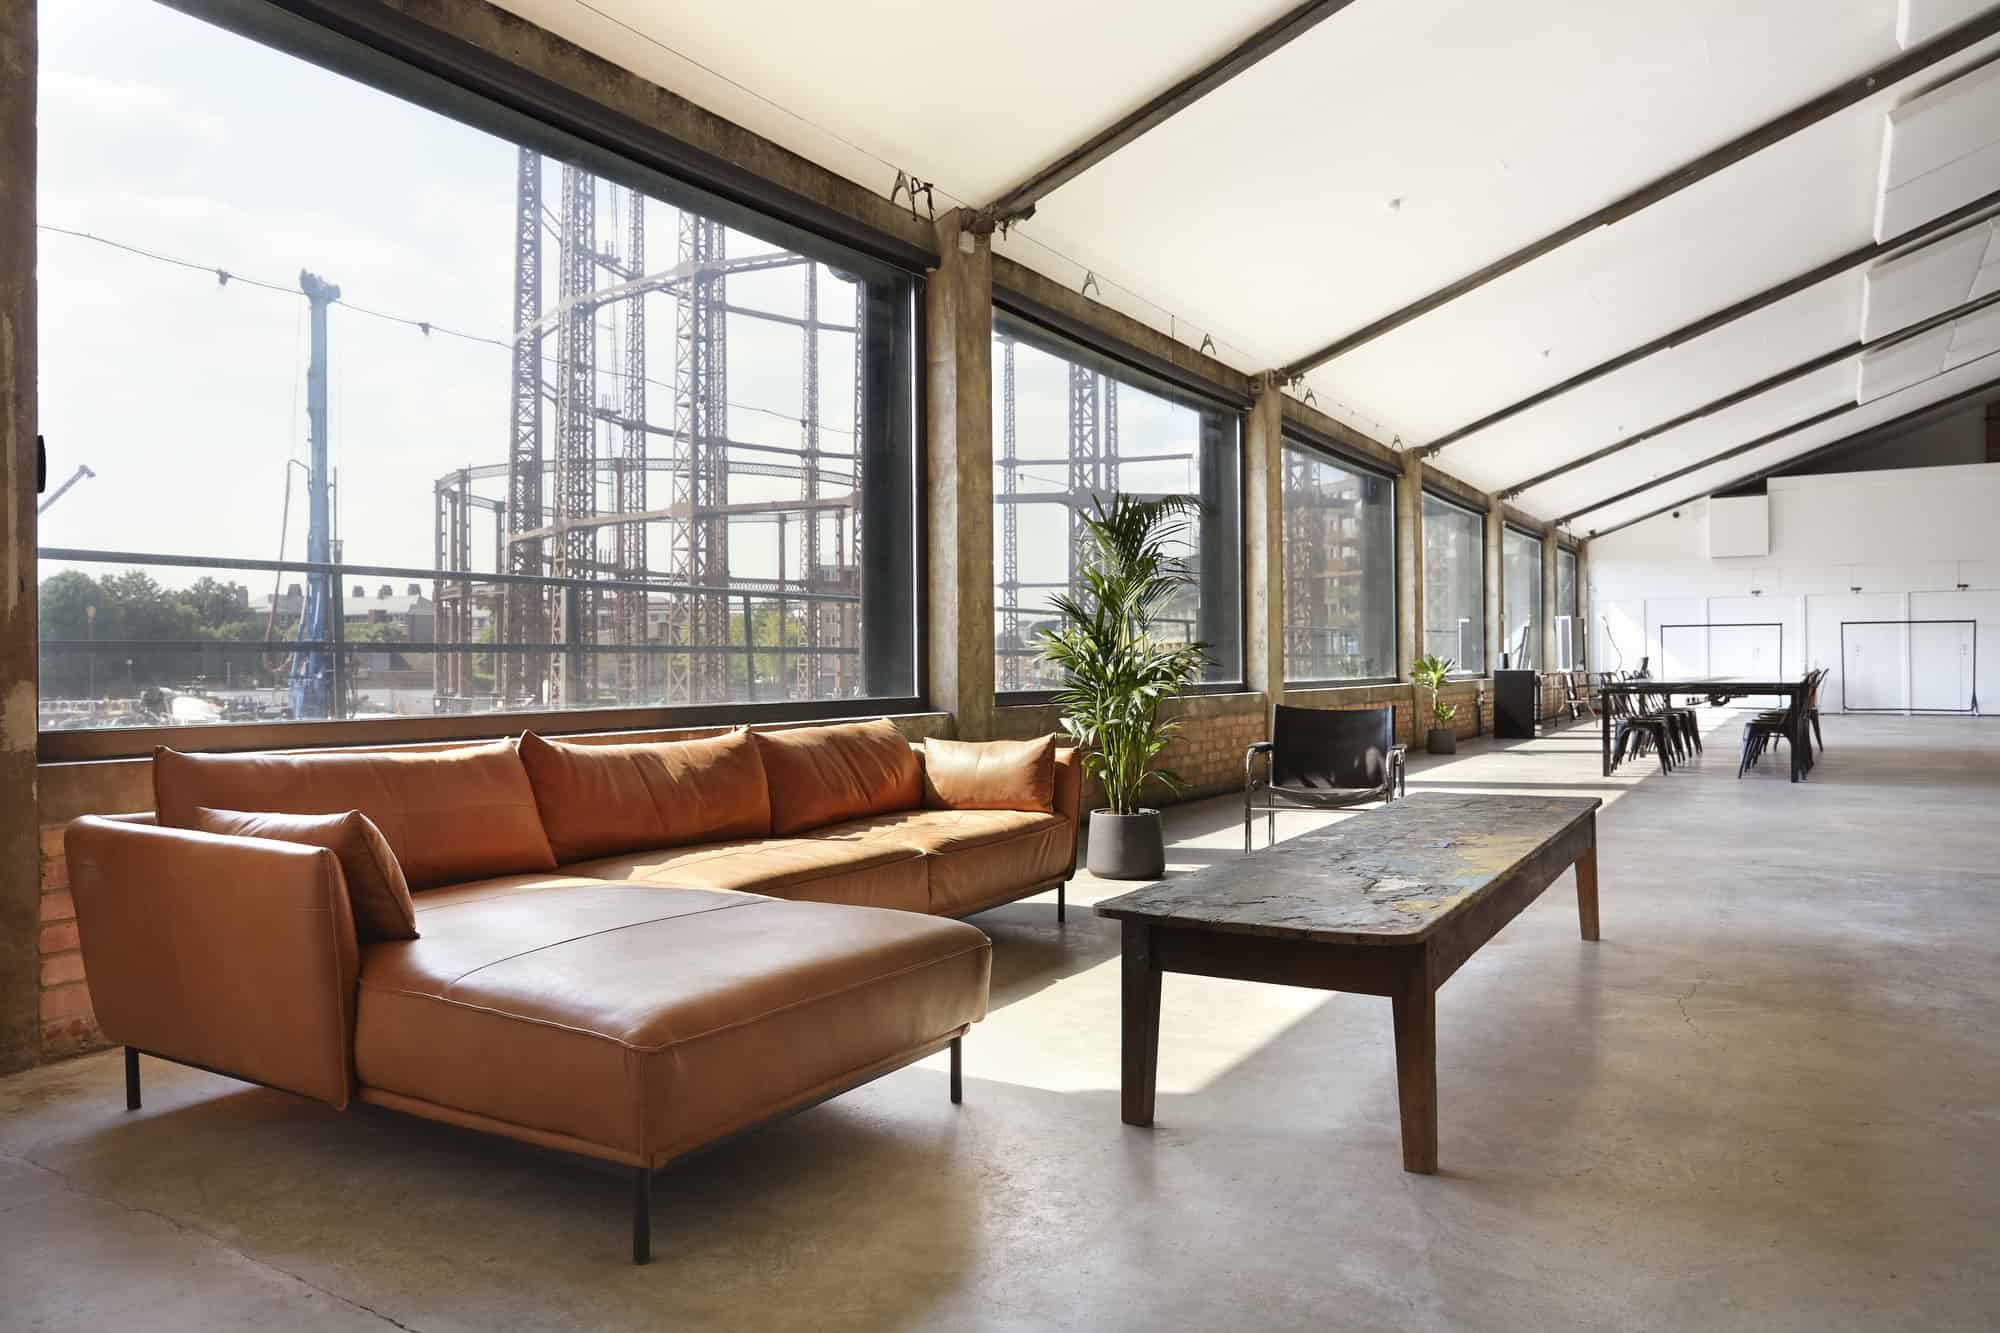 East Warehouse E2 - A large London Warehouse space with rooftop and far reaching urban views. Available for events, photoshoots and filming - The Location Guys